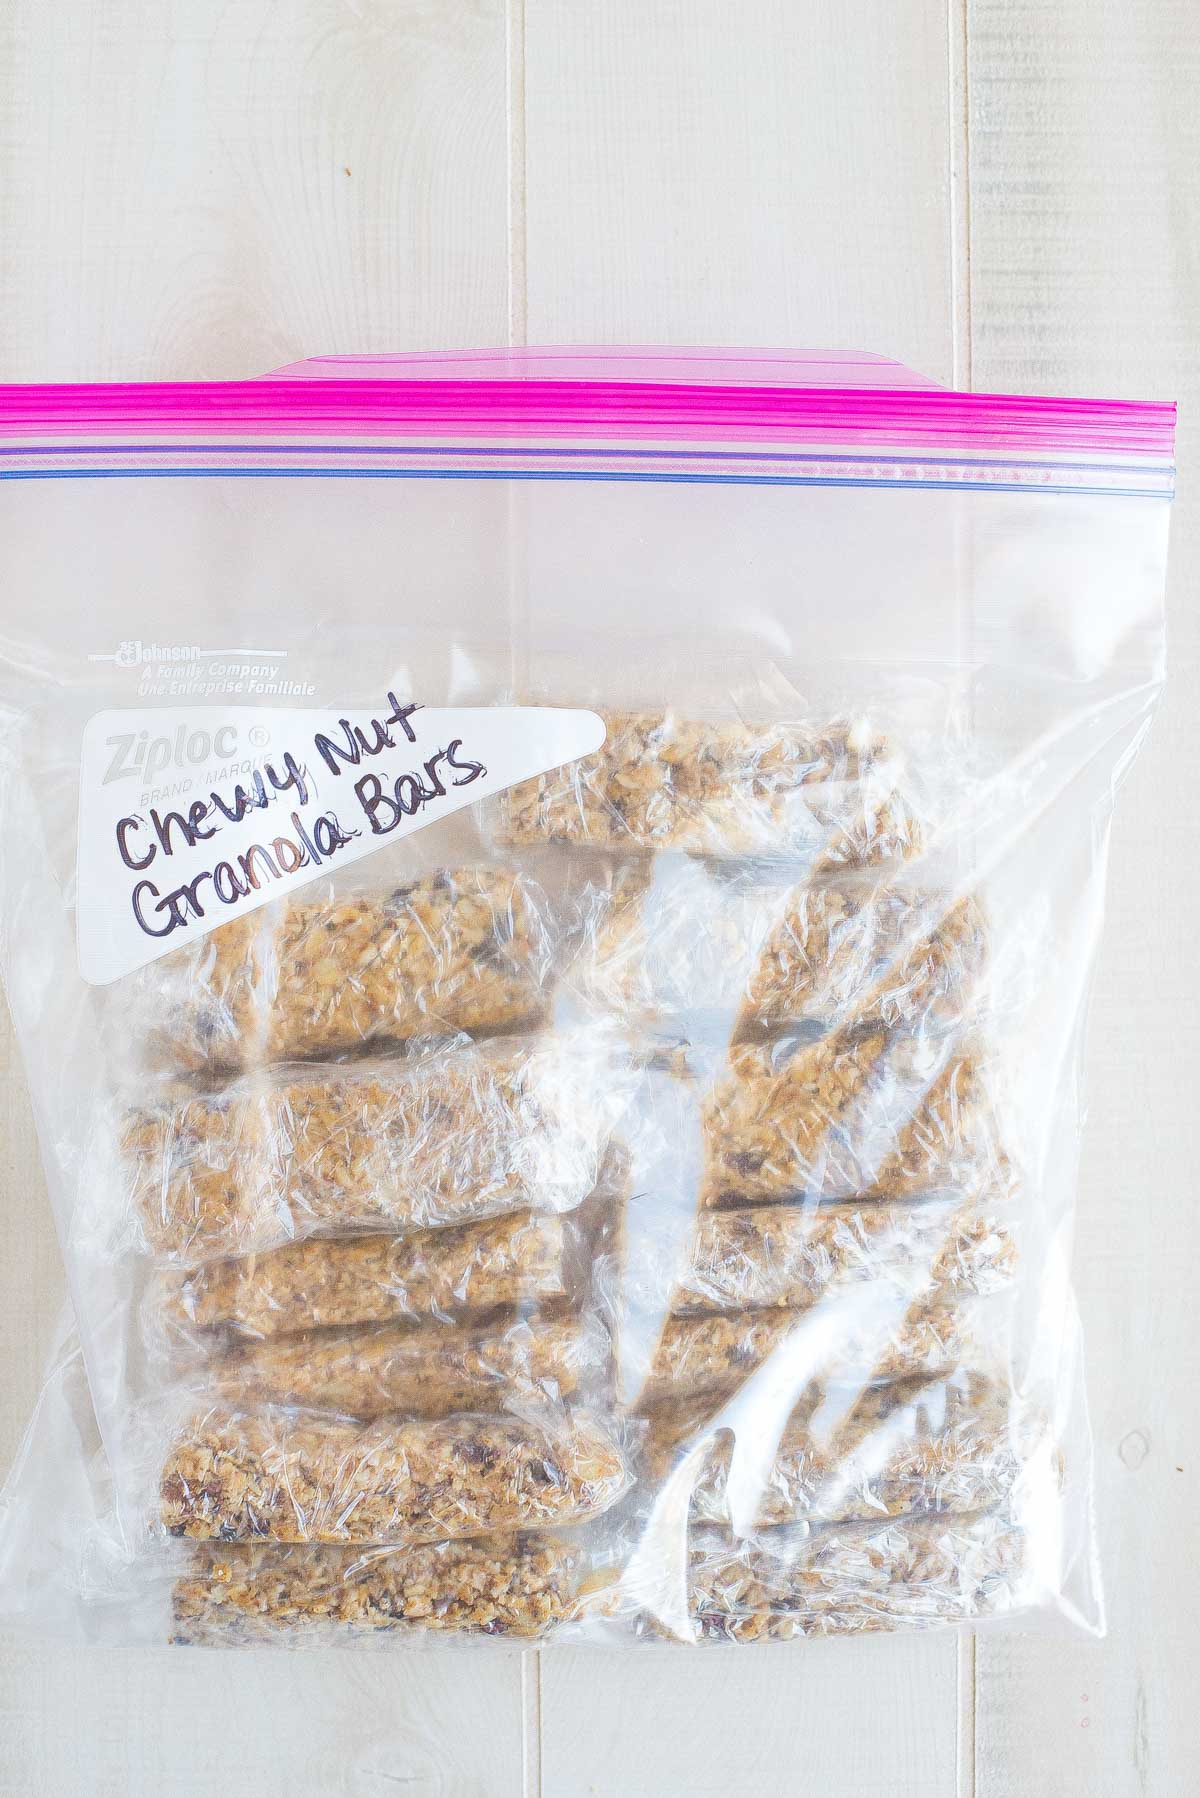 Are you looking for the perfect homemade snack? Check out this 10 minute chewy, no-bake, gluten-free granola bar recipe. You'll be glad you did.